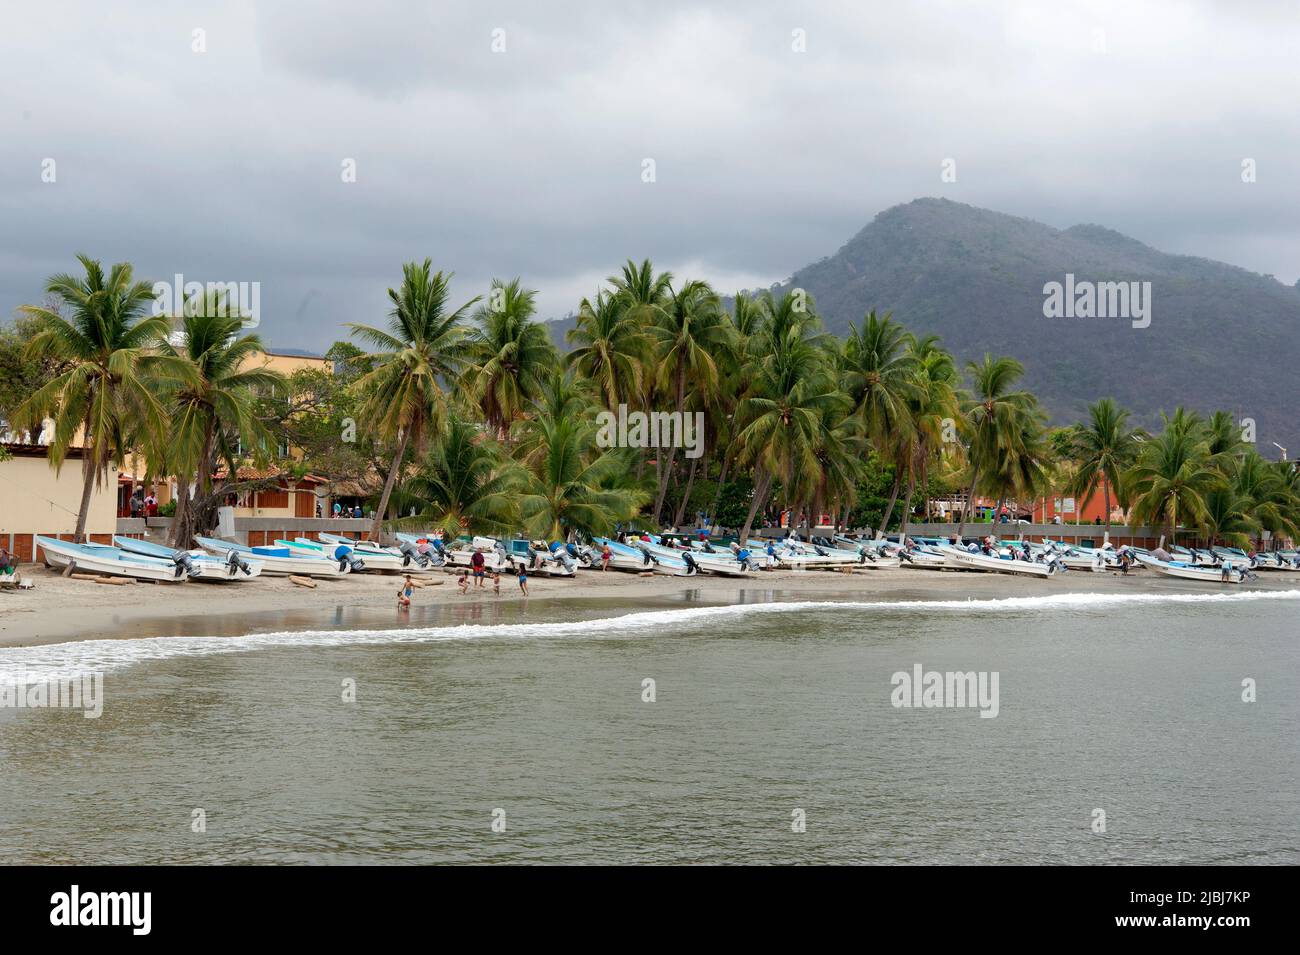 Scenic view of fishing boats on beach with palm trees and hills in Zihuatanejo, Mexico Stock Photo